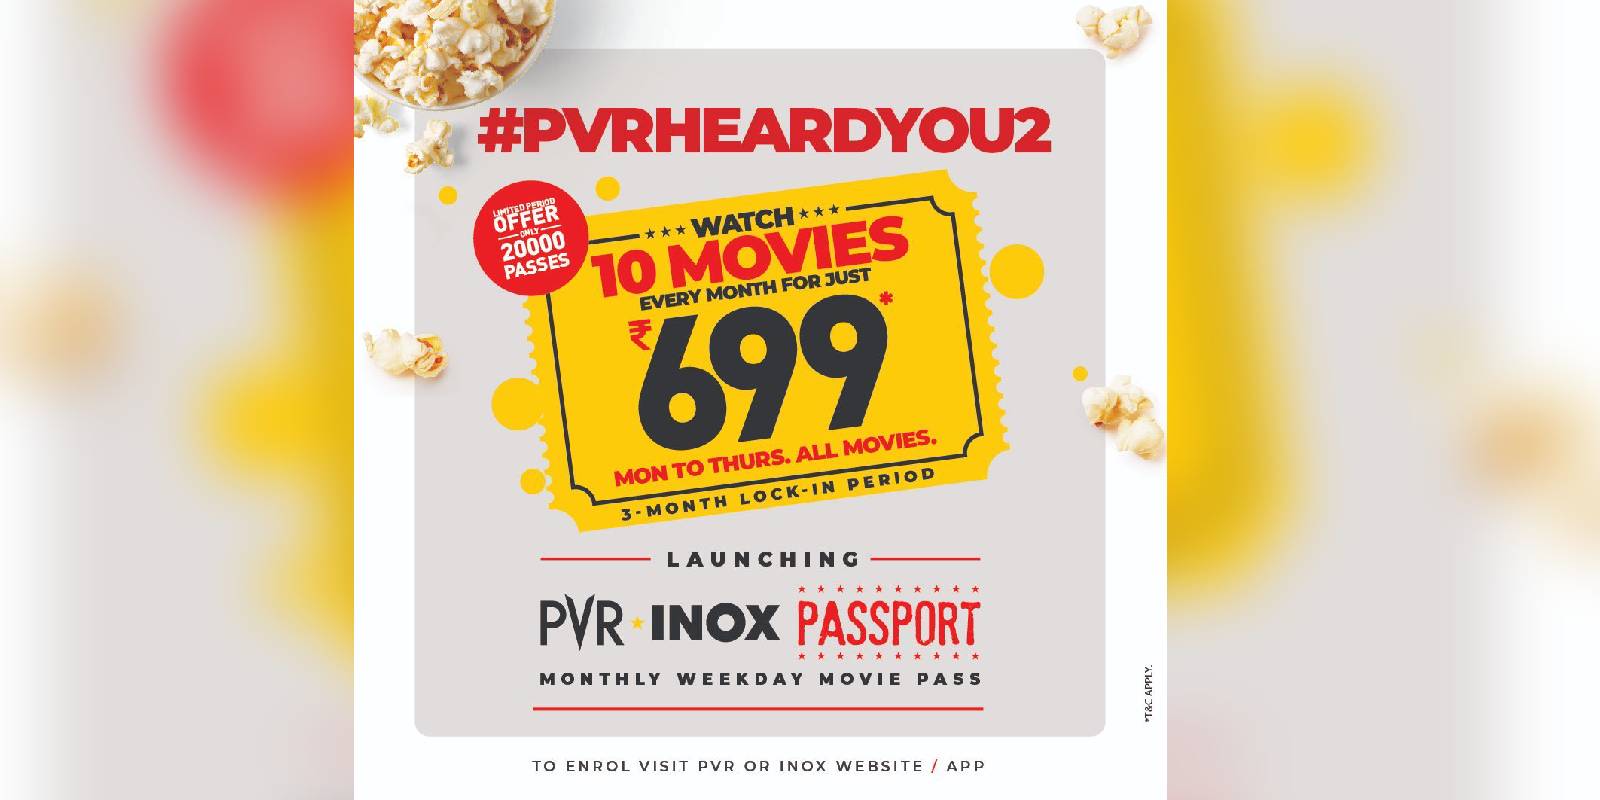 PVR Inox passport not applicable to South India